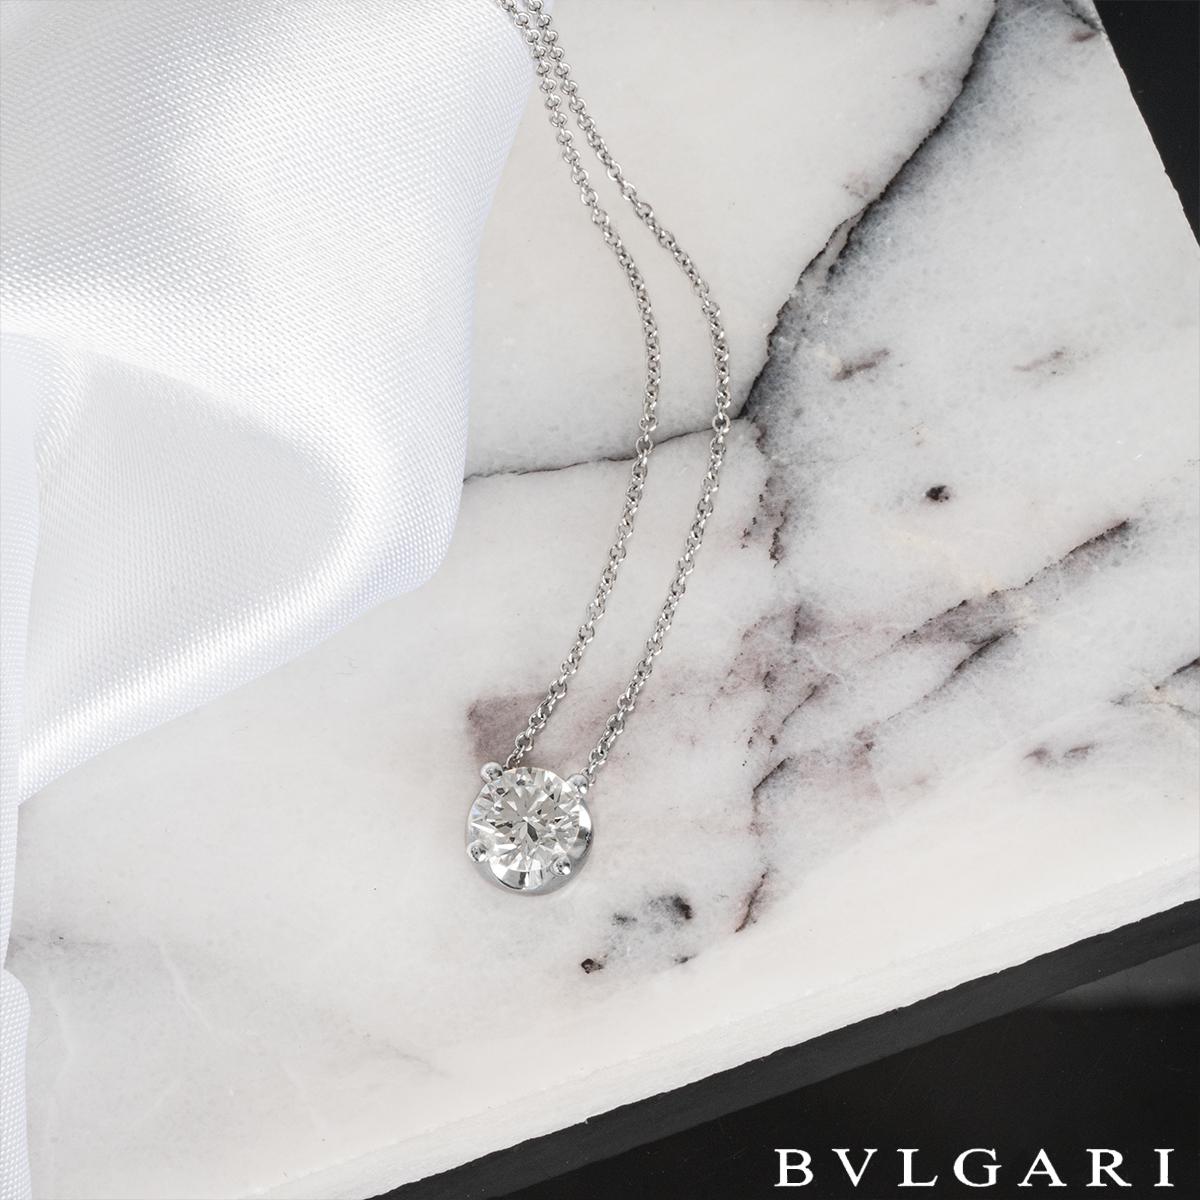 Bvlgari Diamond Corona Necklace 1.02 Carat GIA Certified In Excellent Condition For Sale In London, GB